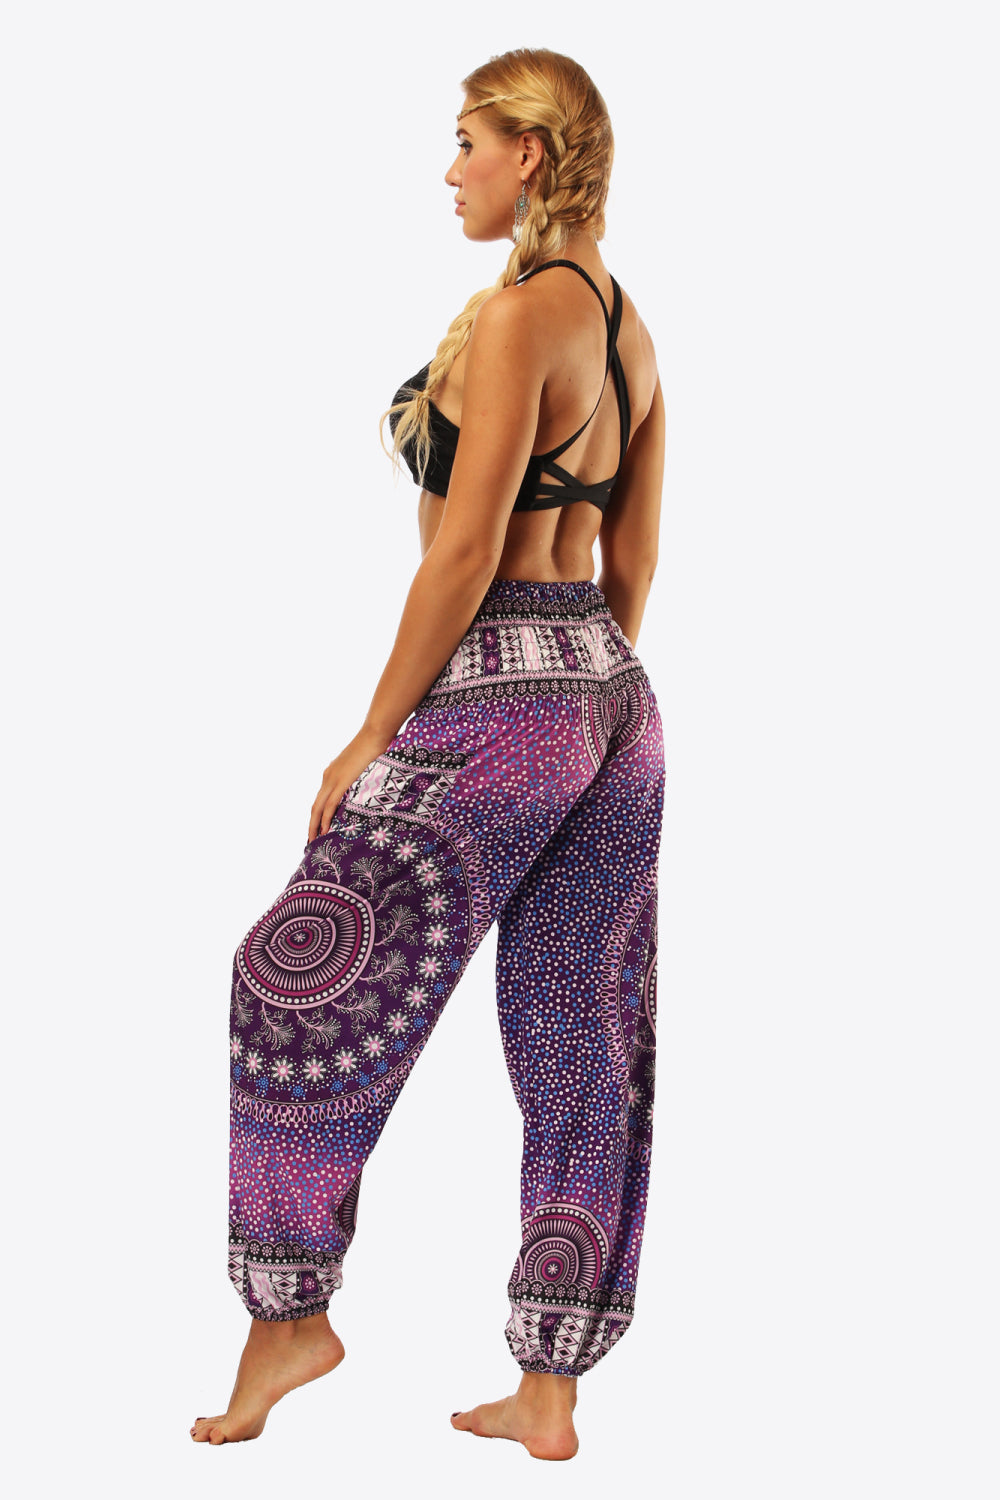 Comfortable and colorful purple harem pants with detailed prints.